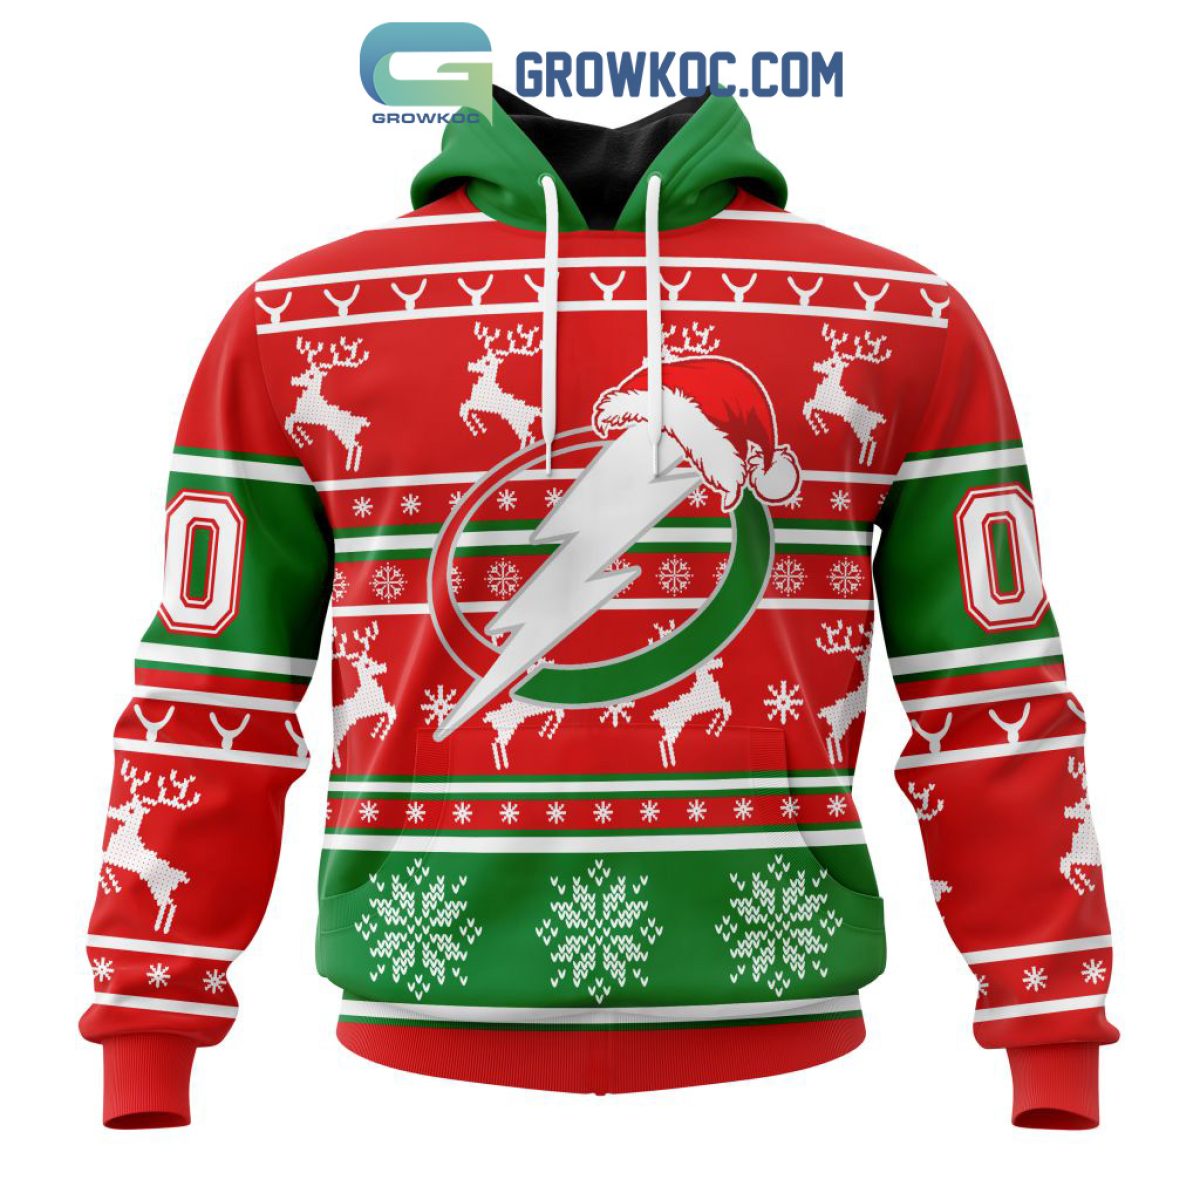 Deals of the Day Lightning Deals Today Prime Christmas Sweatshirts